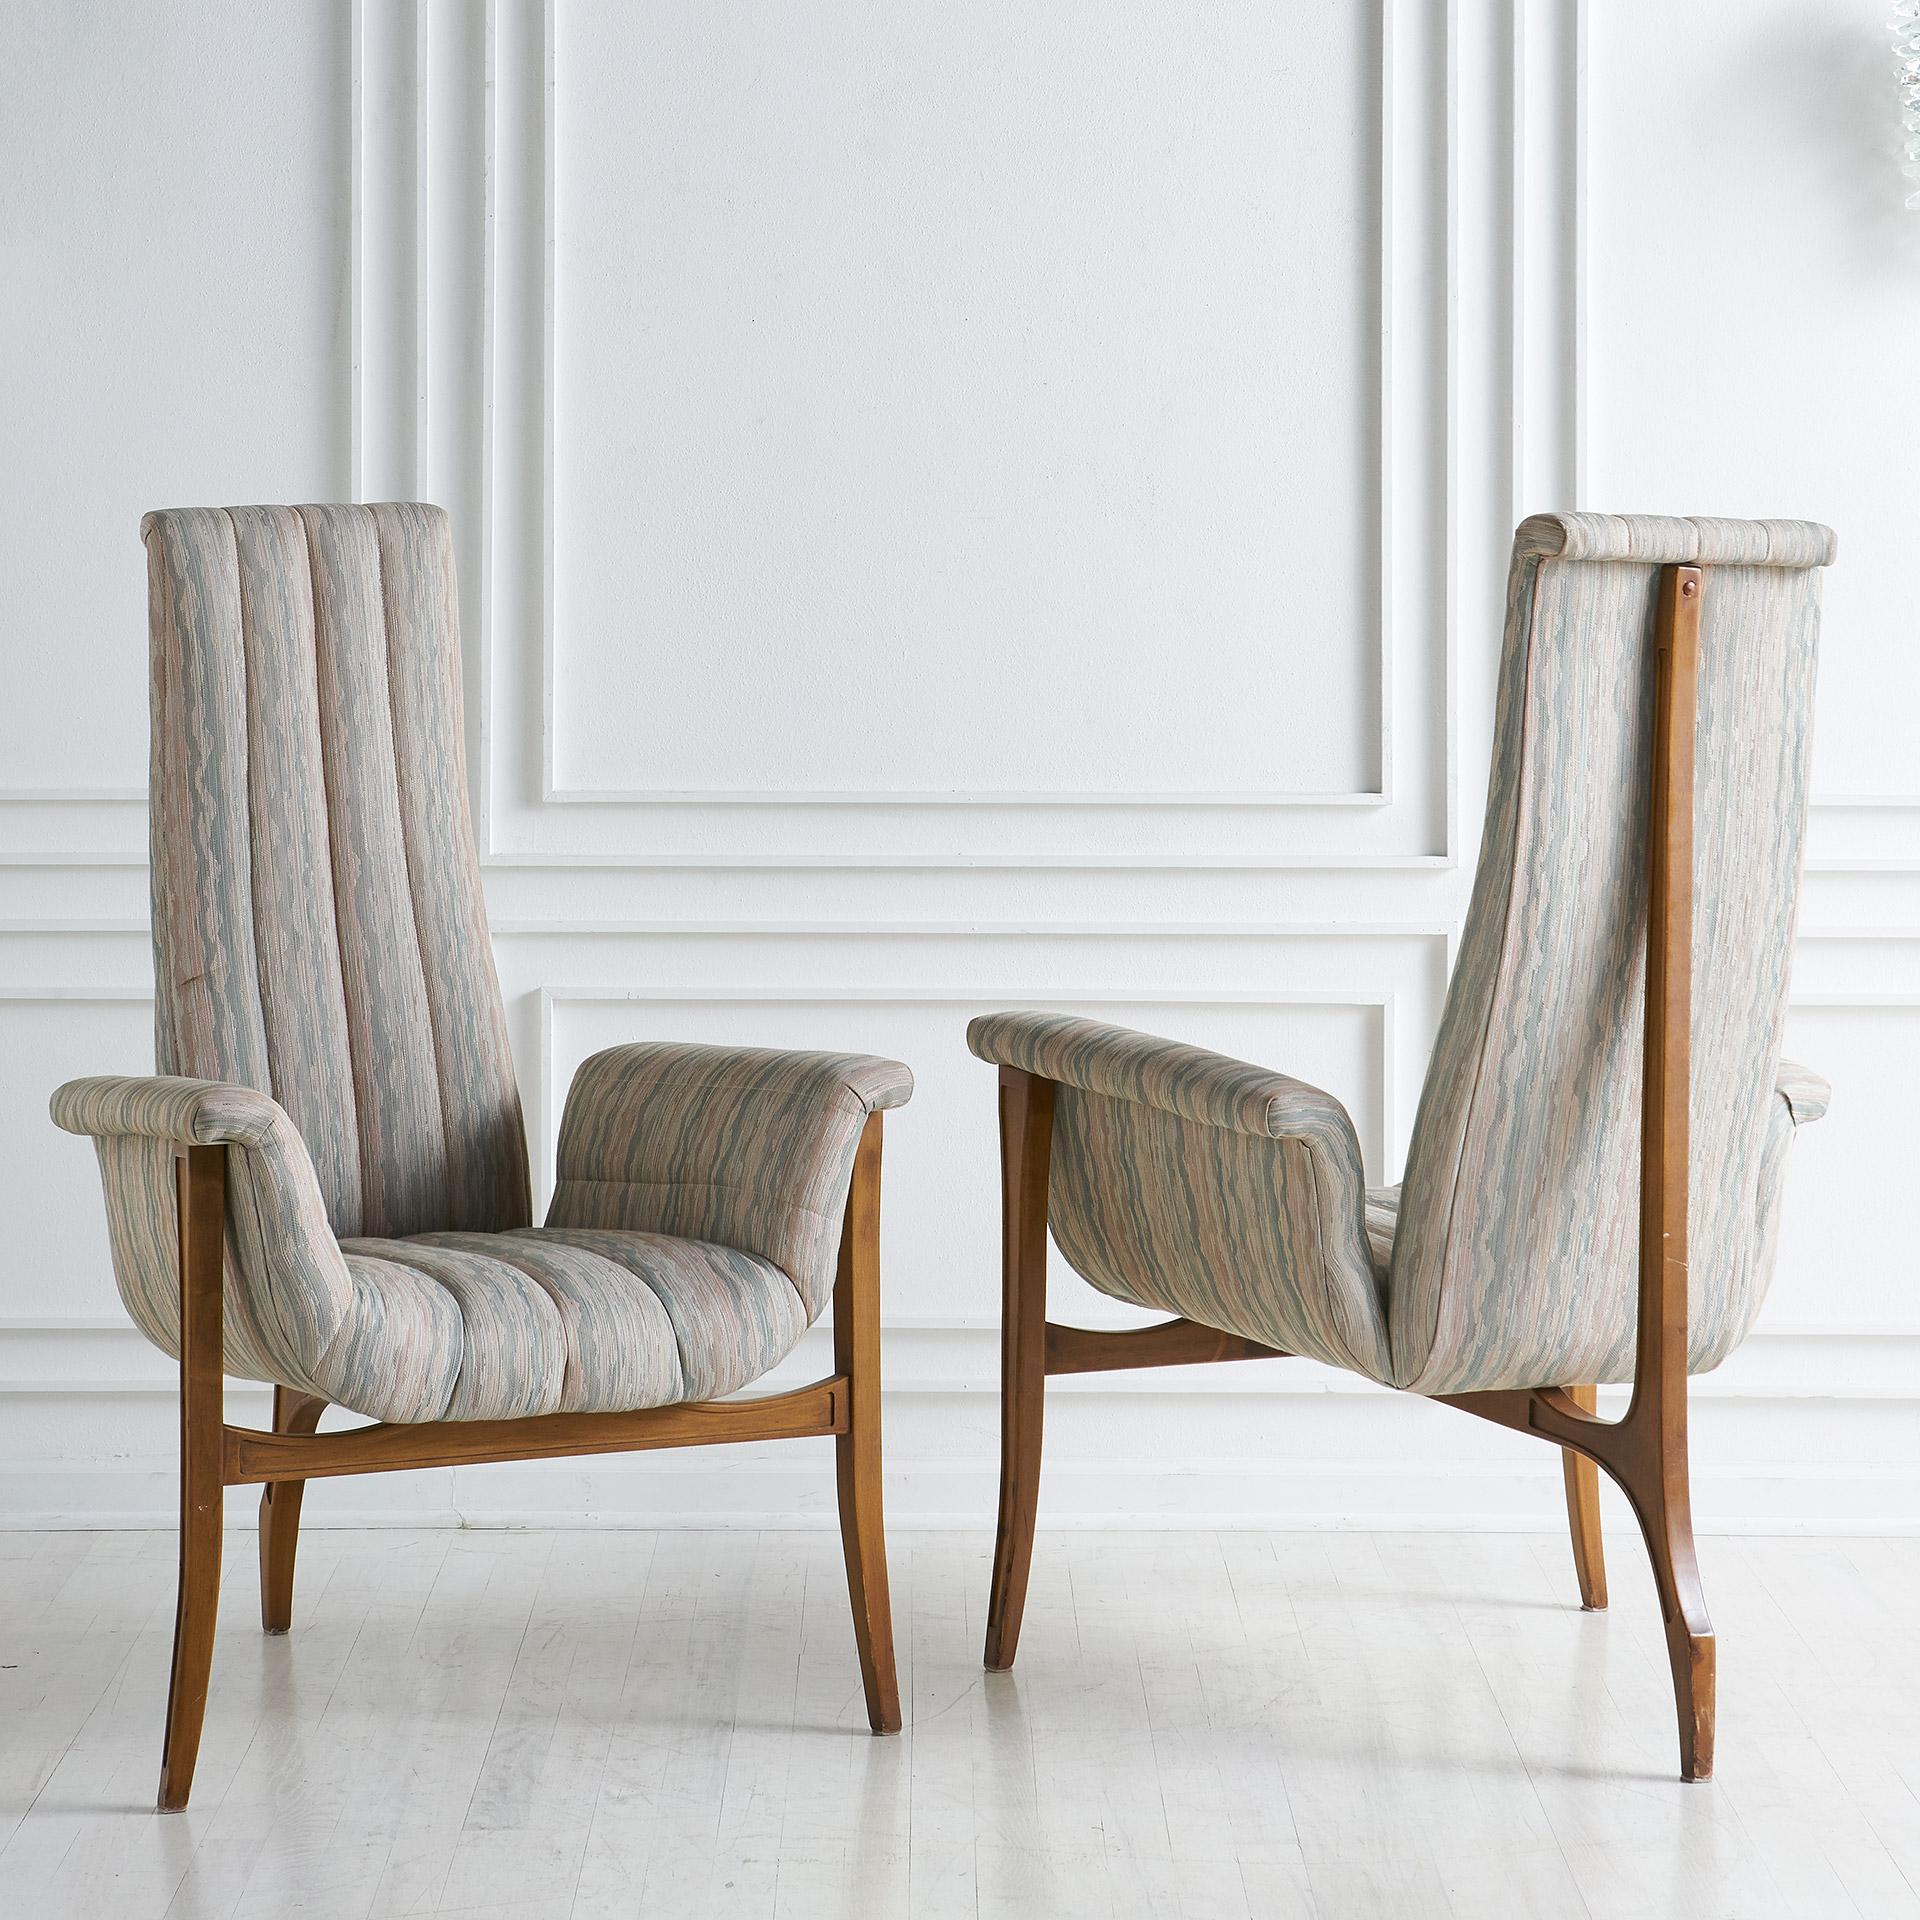 A sculptural pair of midcentury accent chairs featuring a 3 leg design, channeled upholstery, flared arms, and tall back.